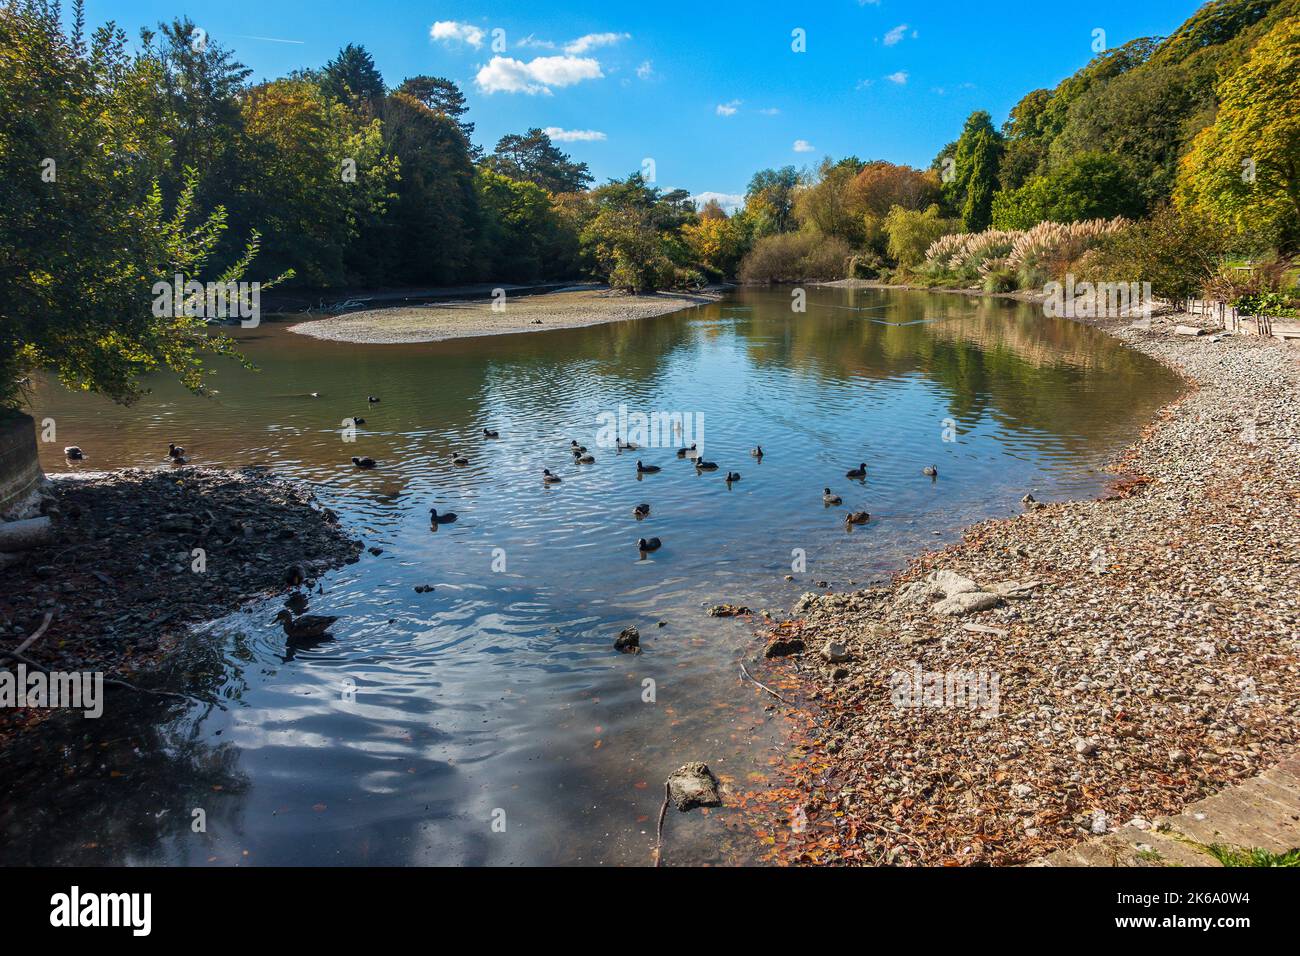 Bushy Ruff,Lake,Drought,2022,Low water level,Russell Gardens,Alkham Valley,Dover,Kent,England,UK Stock Photo